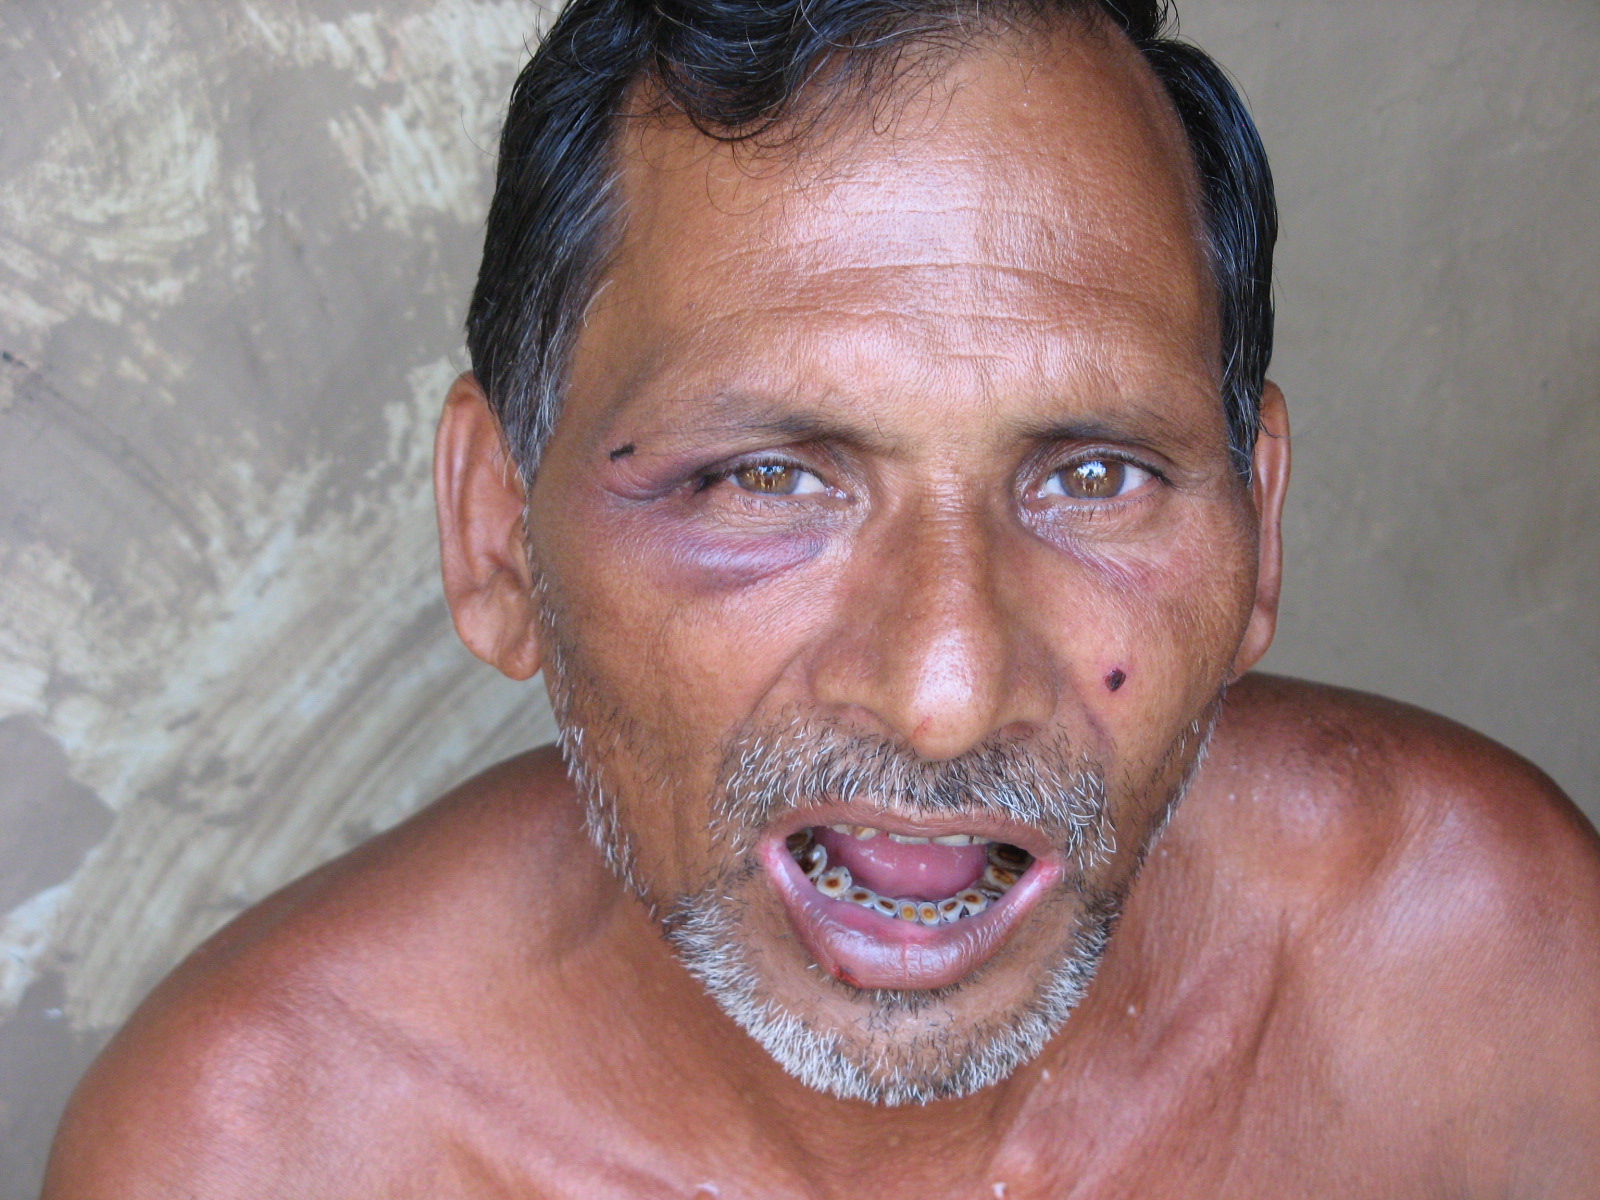 bharat-bardhan-who-was-hit-by-a-rubber-bullet-and-a-shotgun-pellet-on-his-face.JPG